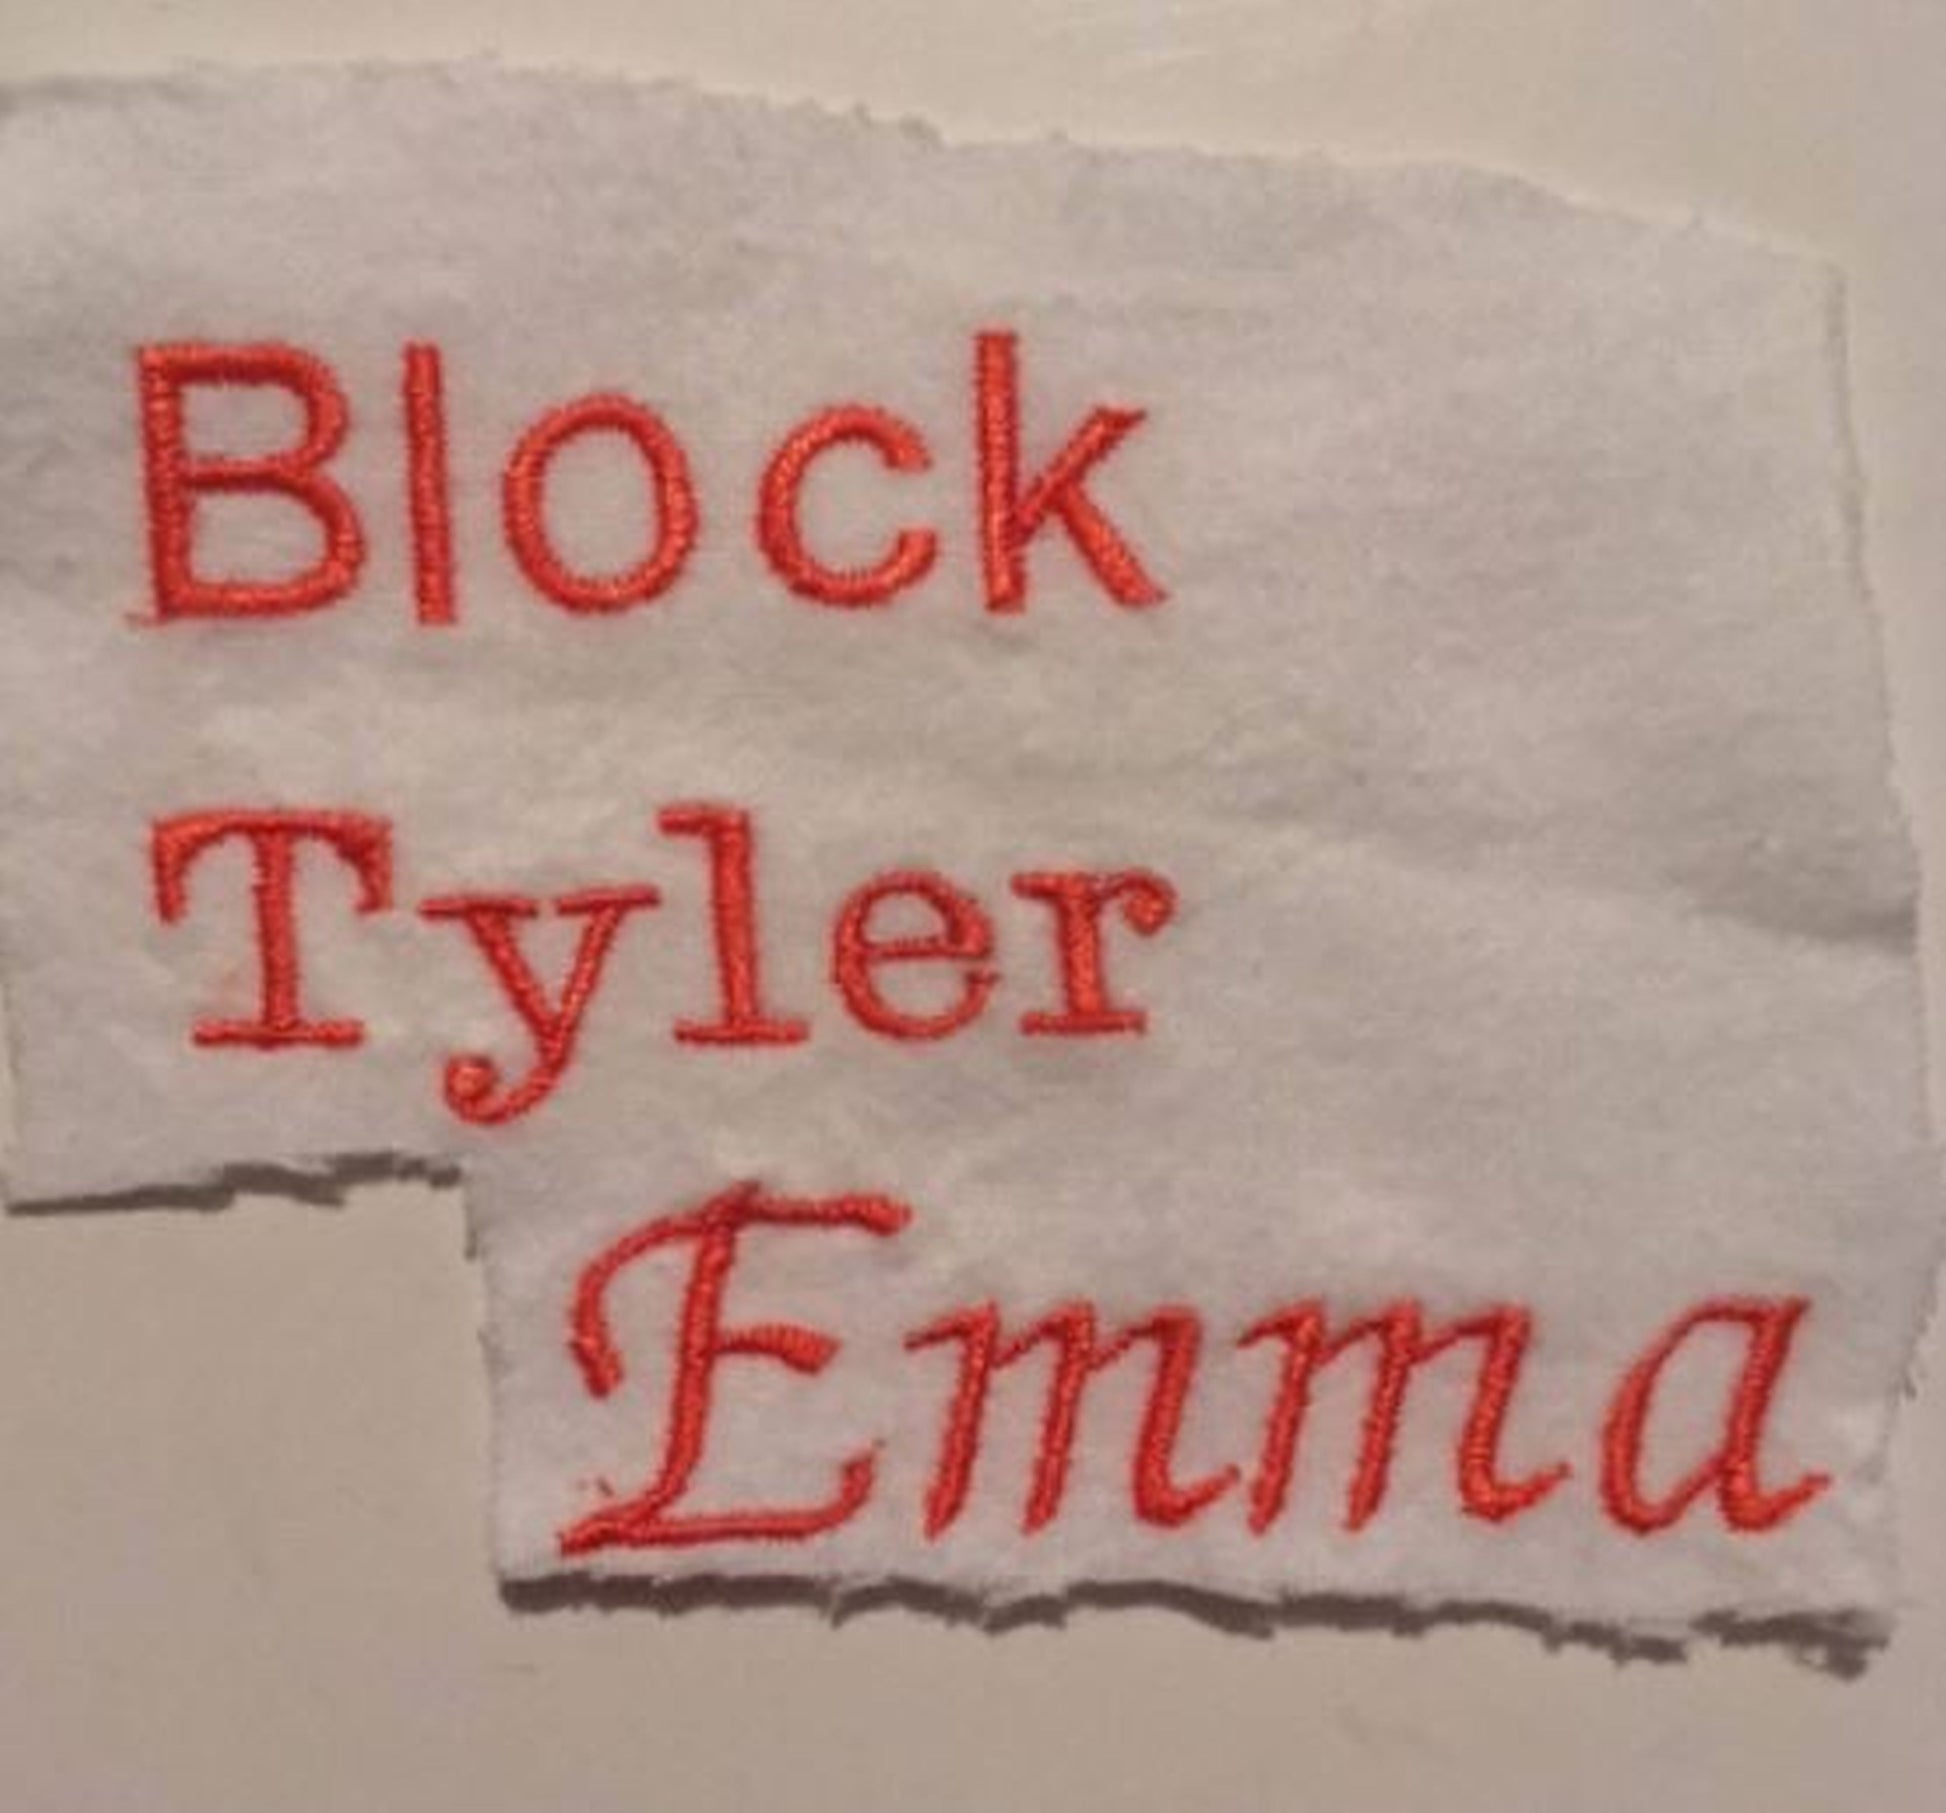 embroidery fonts available - block, tyler, emma